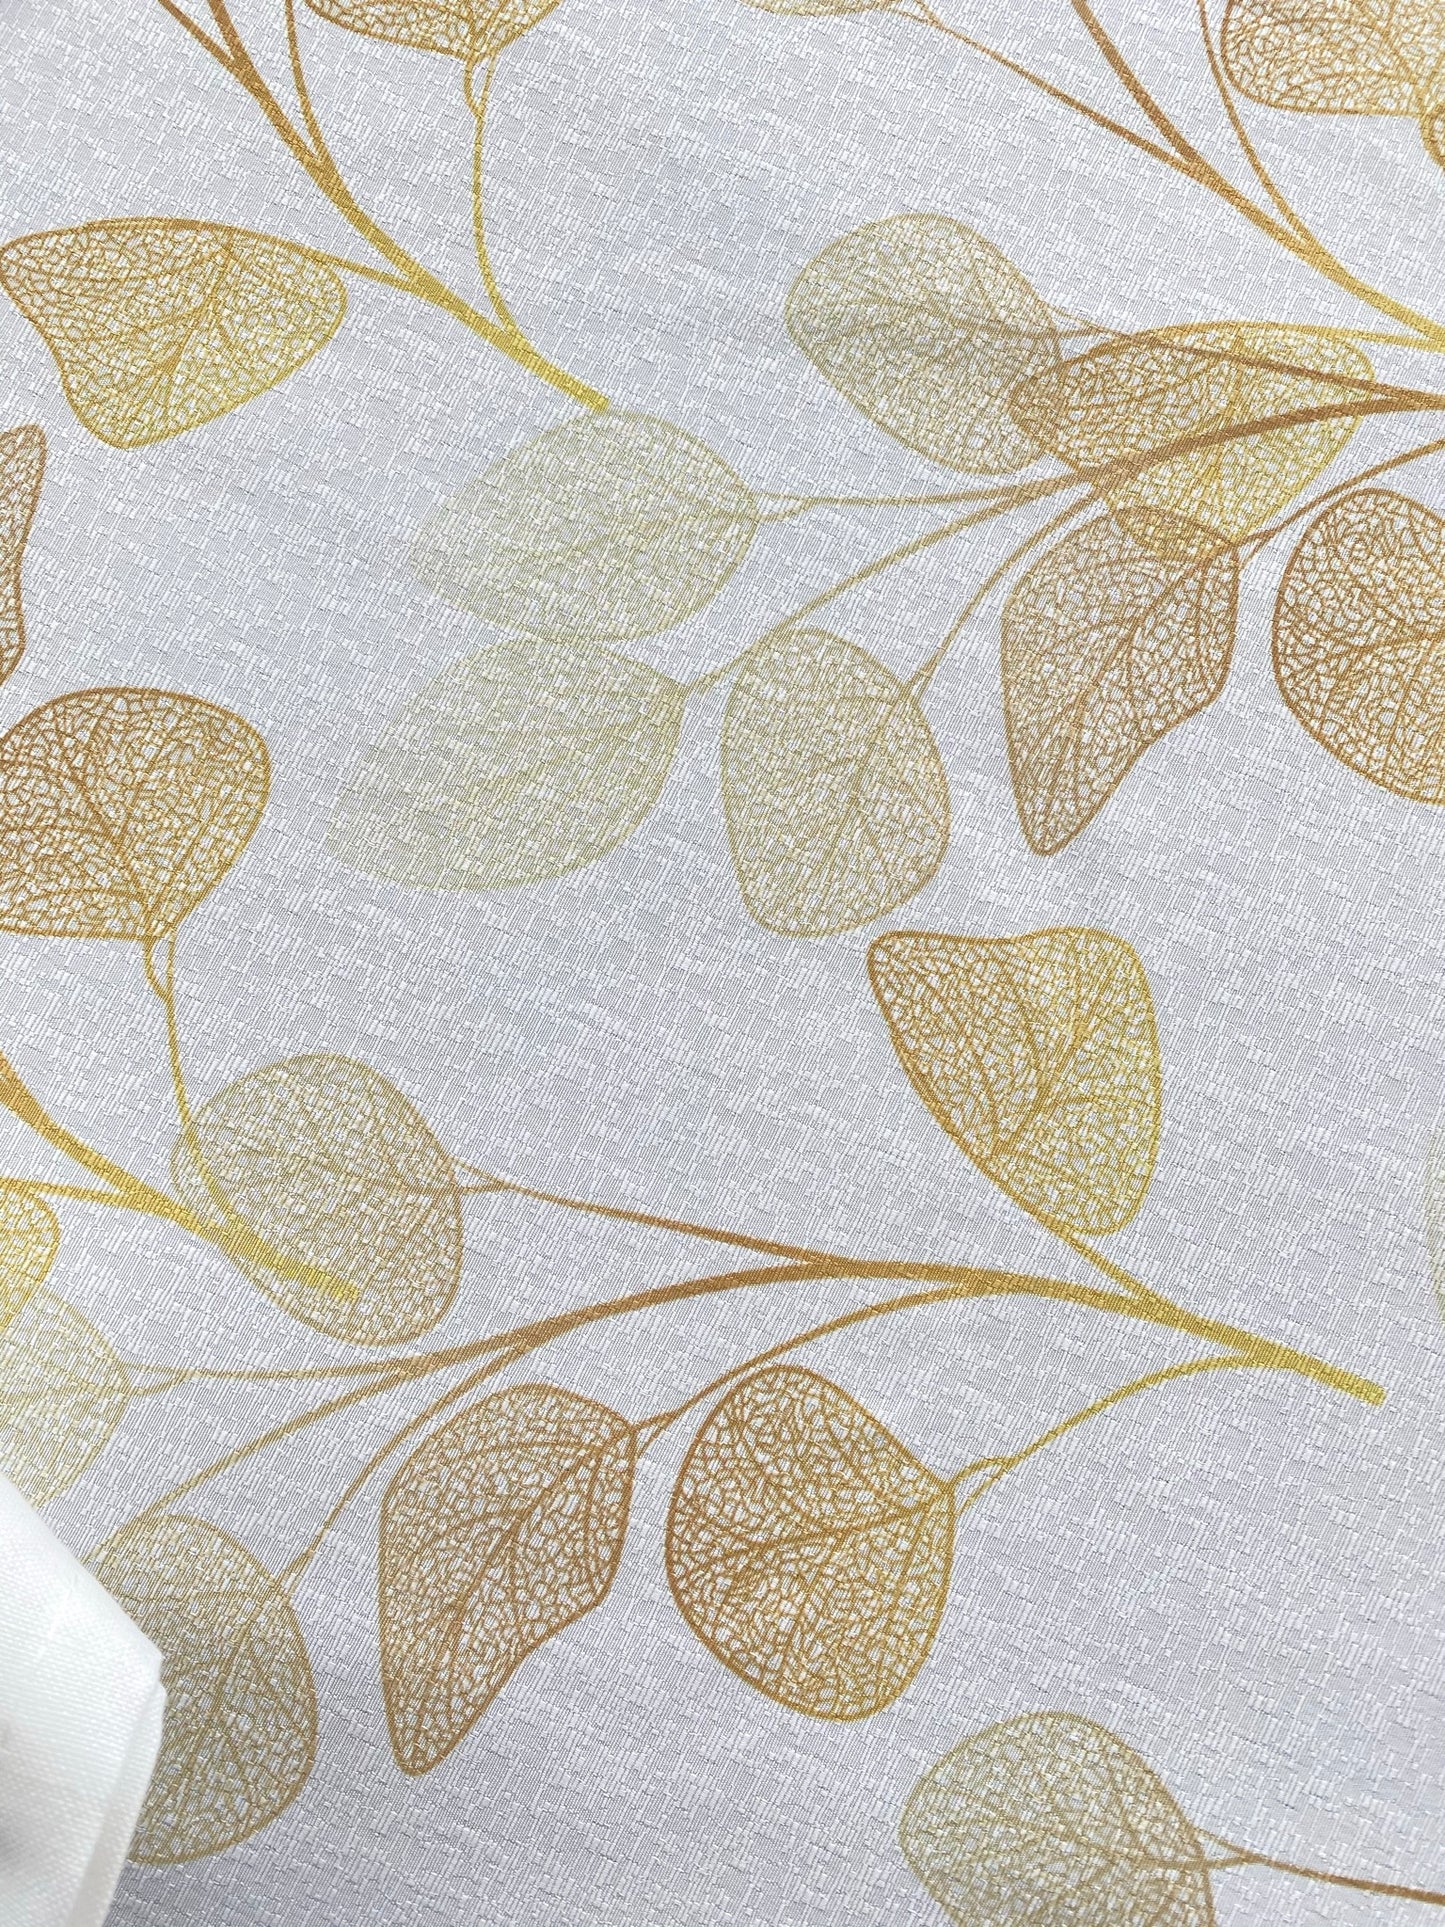 Gold Leaf Luxe Dressy Fabric